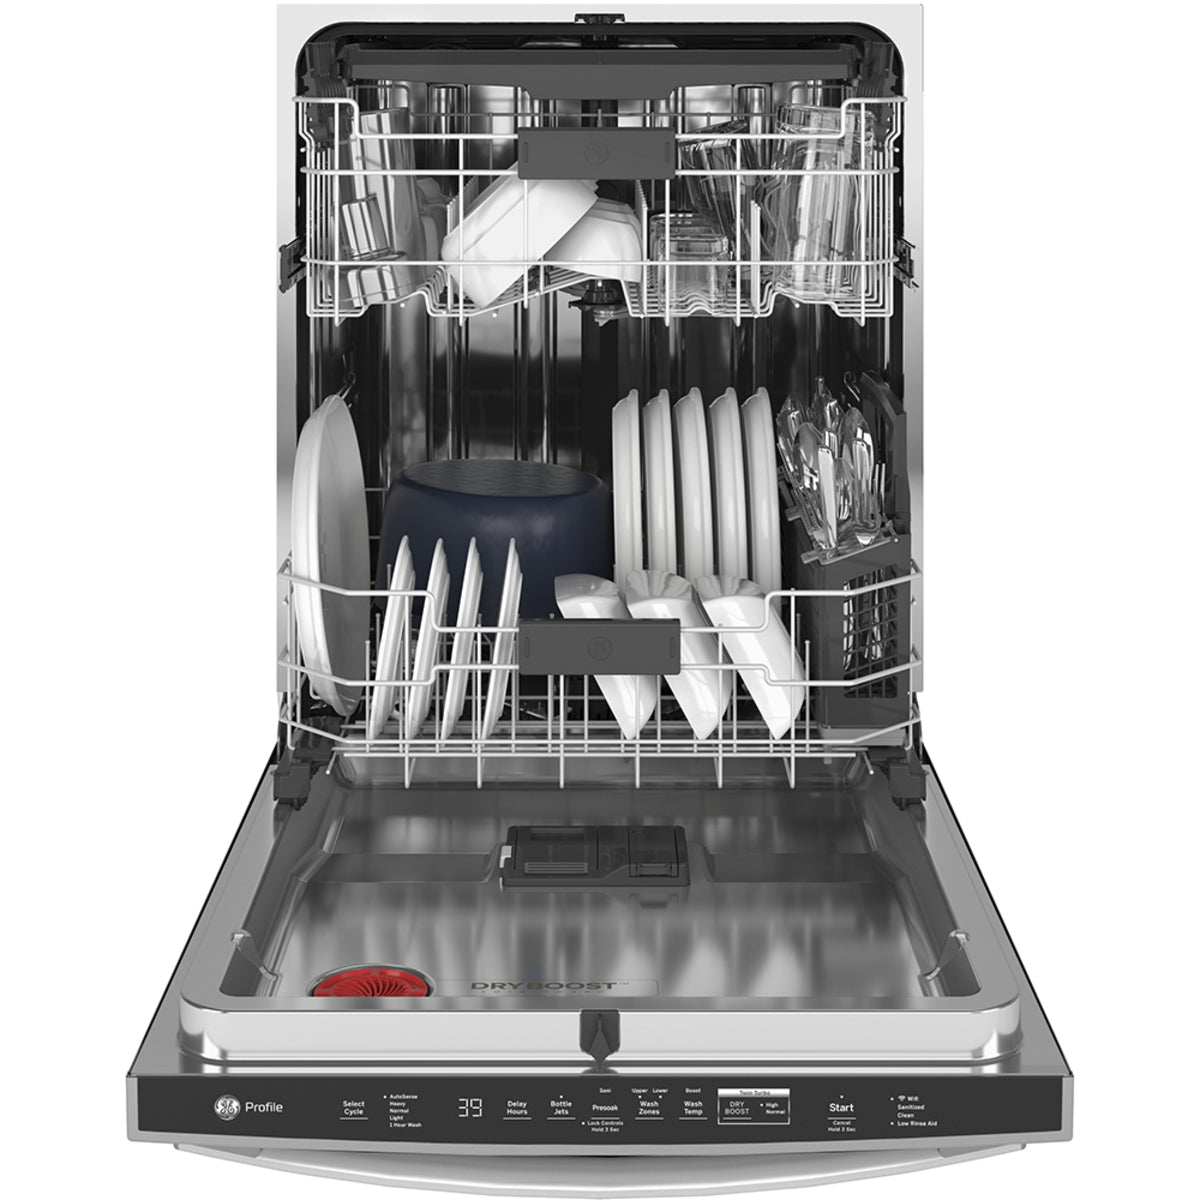 GE Profile - 39 dBA Built In Dishwasher in Stainless - PDT785SYNFS